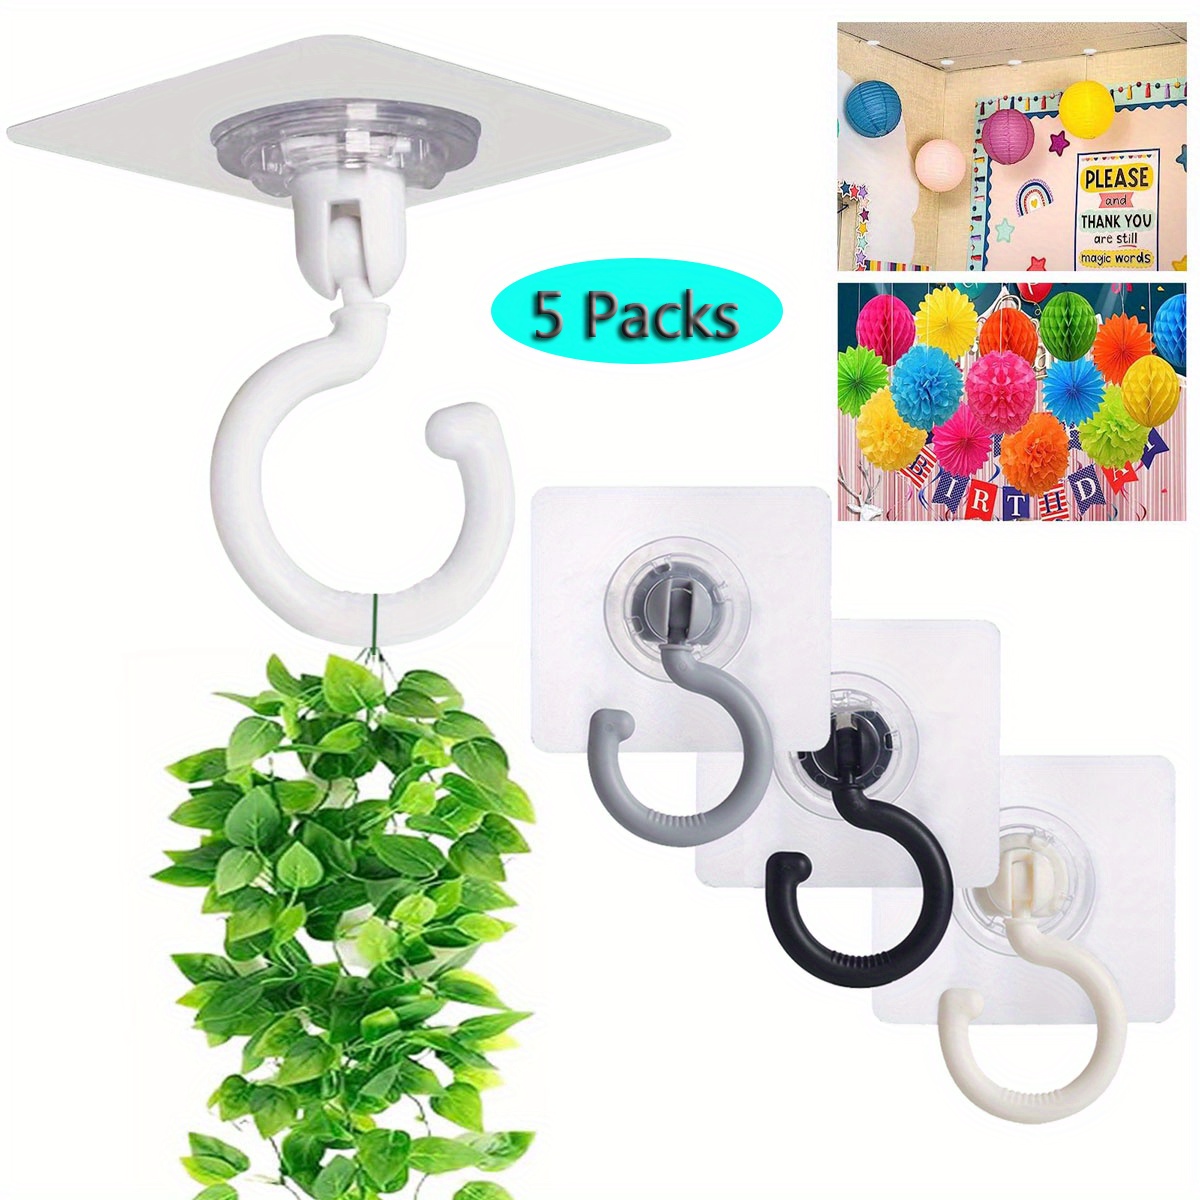 4 Packs Ceiling Hooks For Hanging Plants Heavy Duty Metal Wall